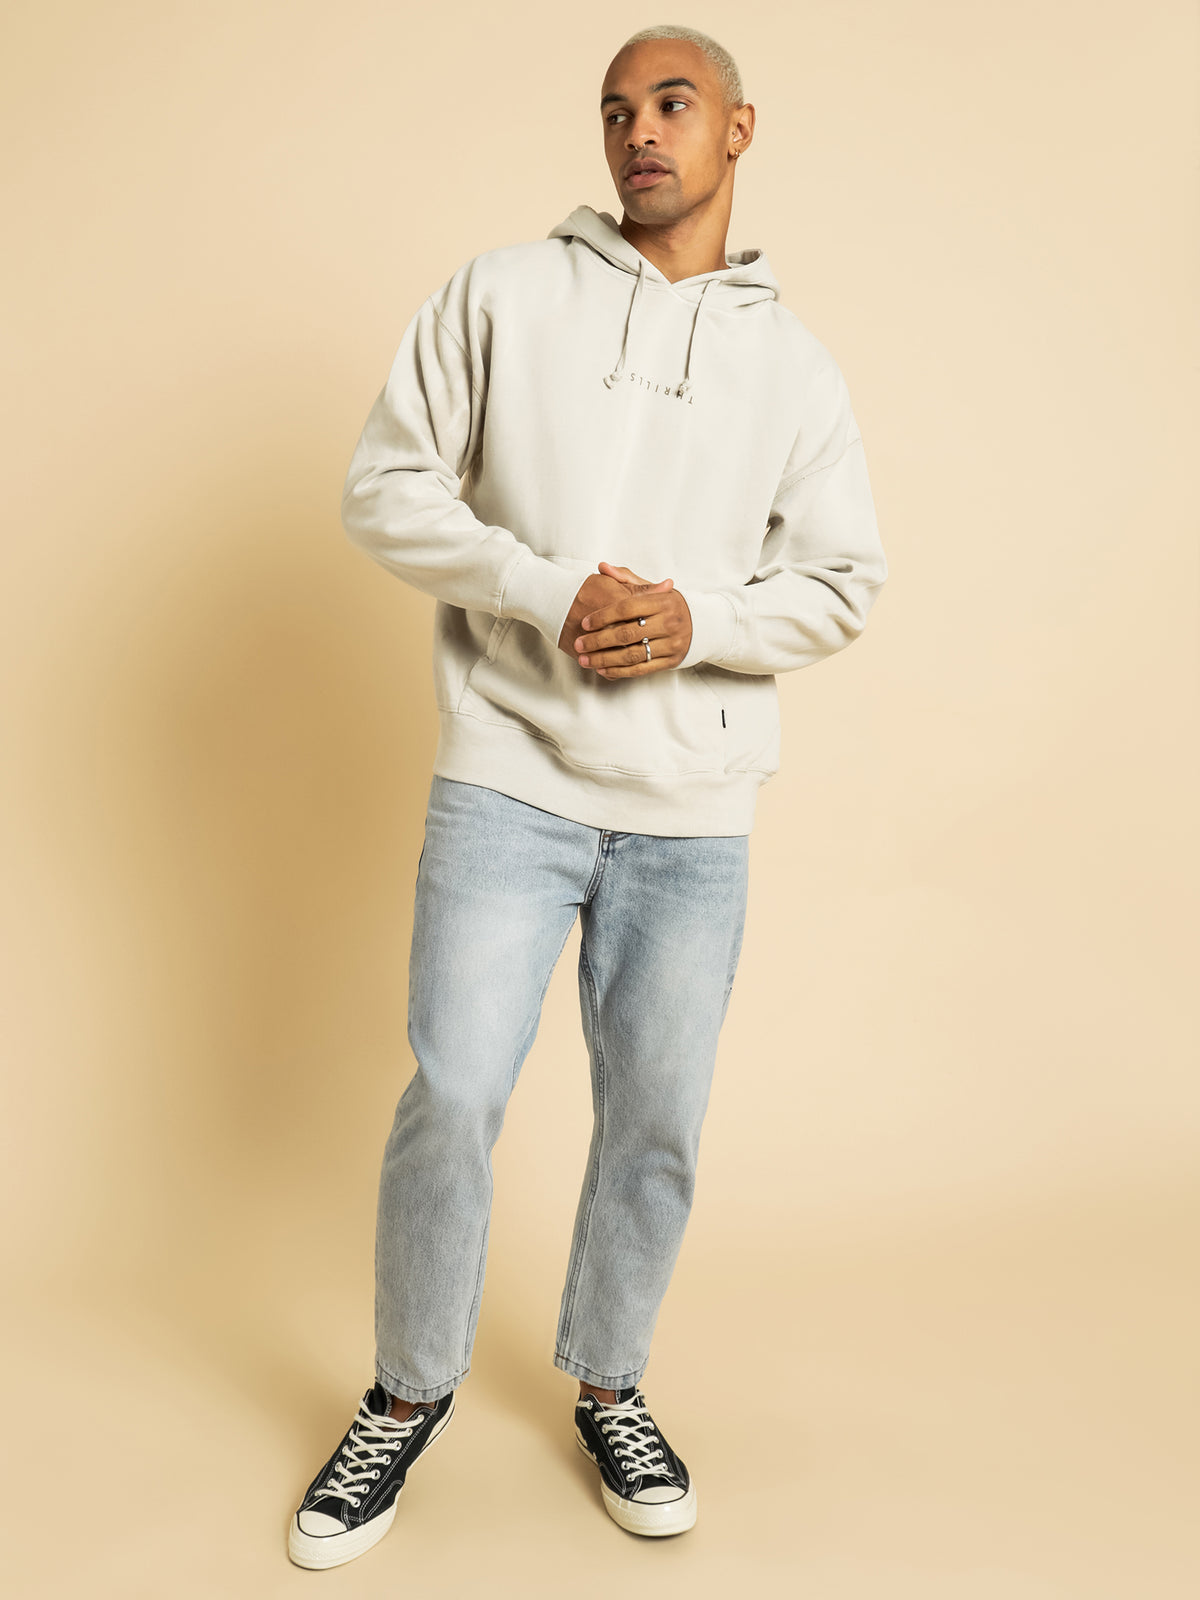 Thrills Slouch Hoodie in Cement